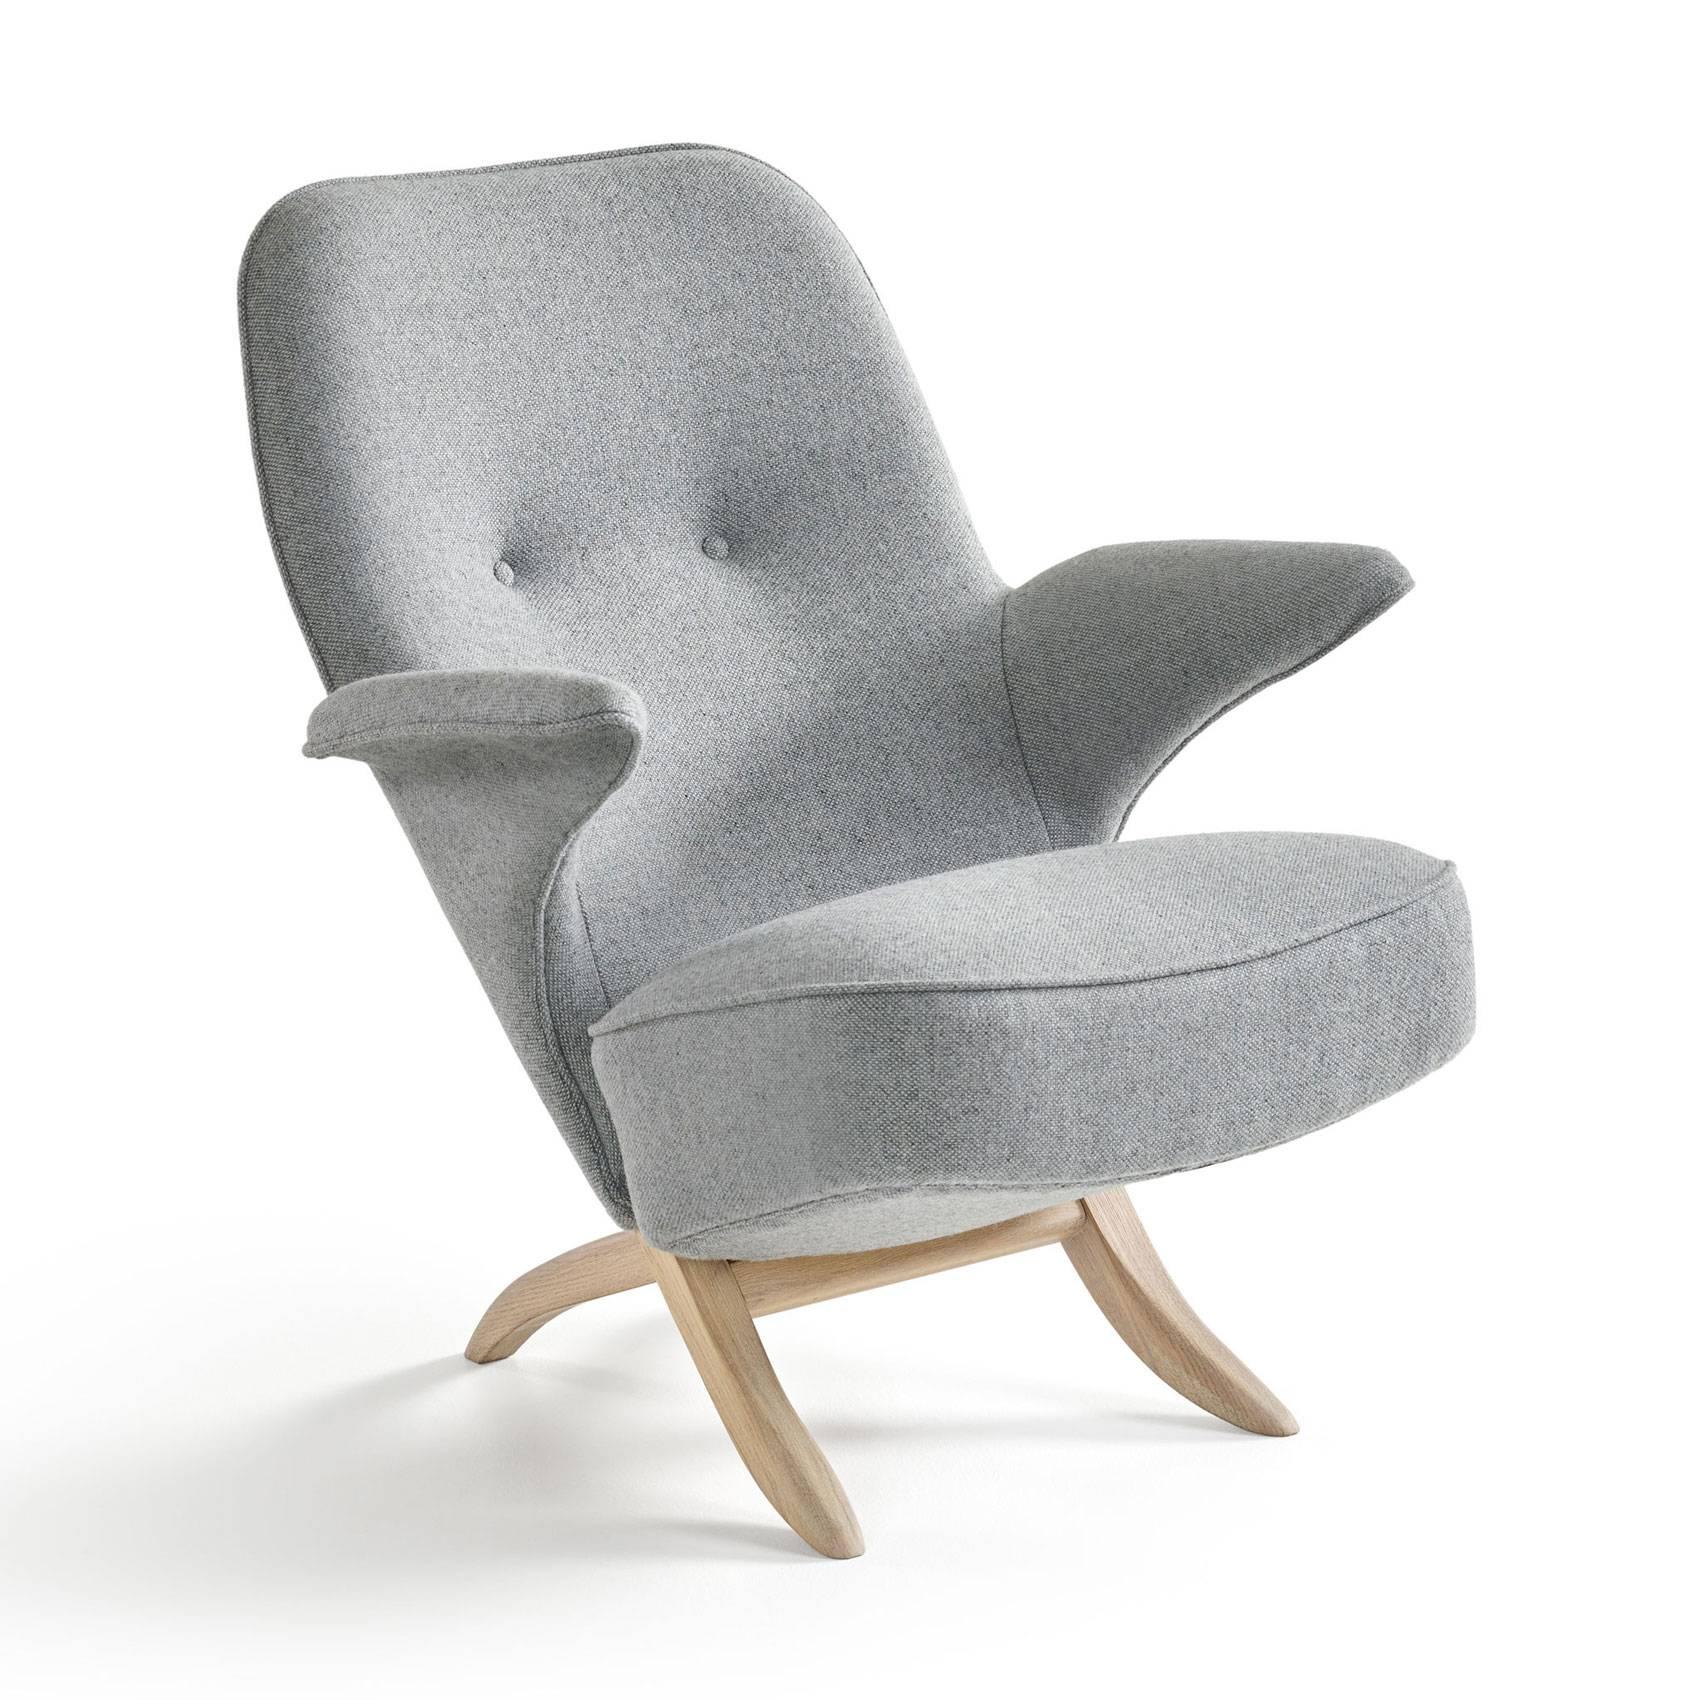 Artifort celebrates its 125th anniversary with a limited edition re-release of Theo Ruth’s iconic ‘Pinguin’ chair. This armchair consists of two separate base elements that are fitted together with forked ends and held together by gravity.